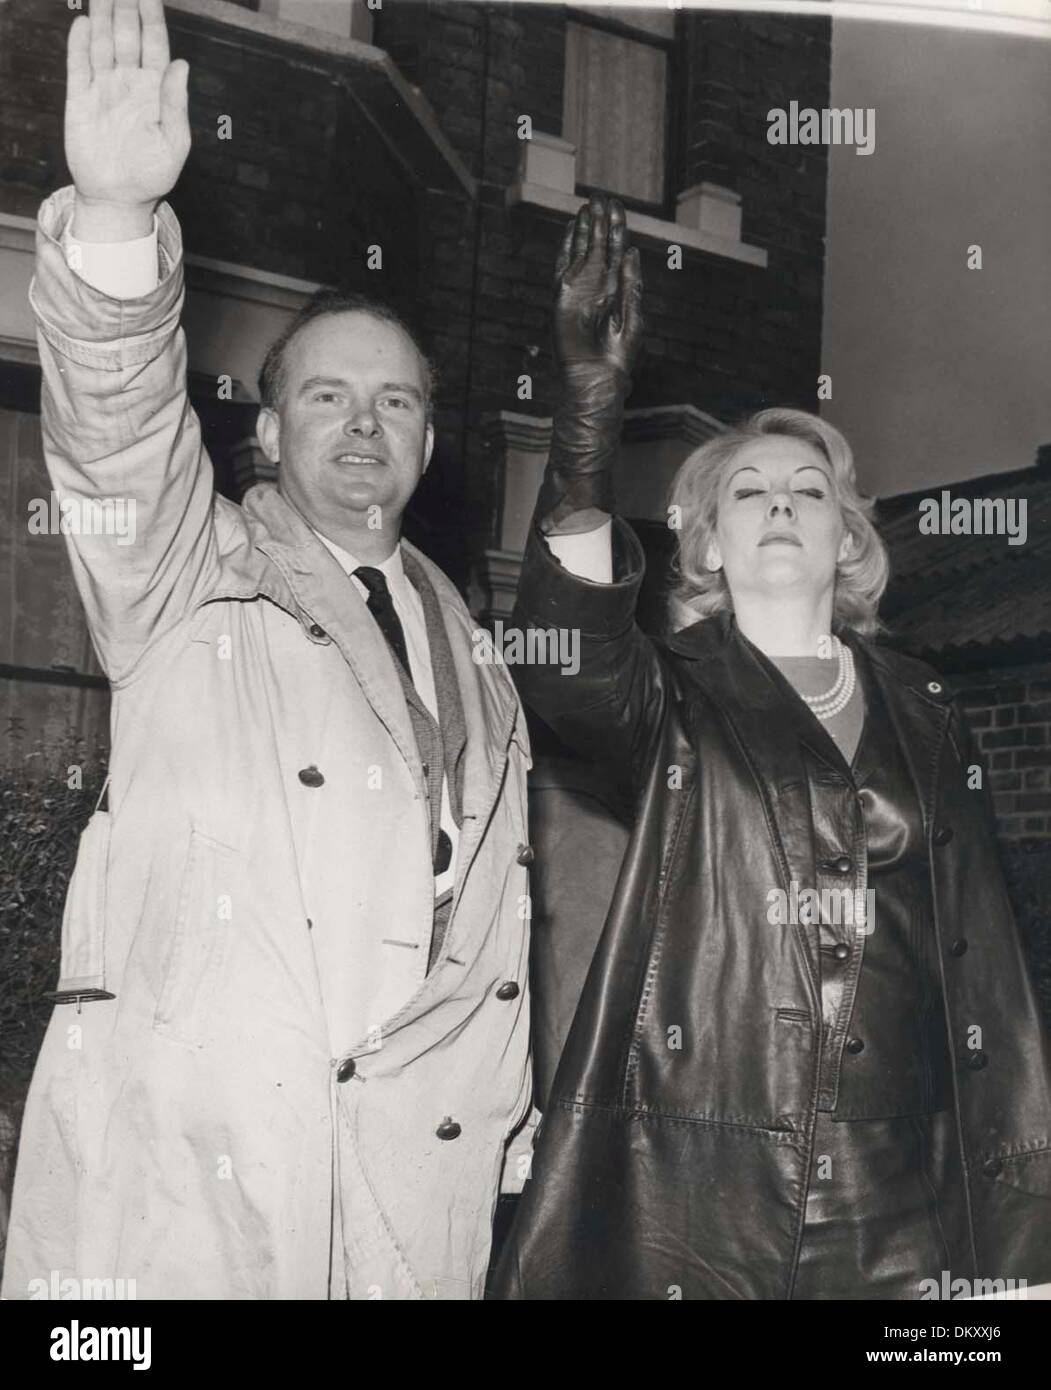 ovn Compulsion Besiddelse Jan 11, 1965 - London, England, United Kingdom - COLIN JORDAN and his wife  give the Nazi salute after he painted him self black and tried to nominate  himself as the candidate